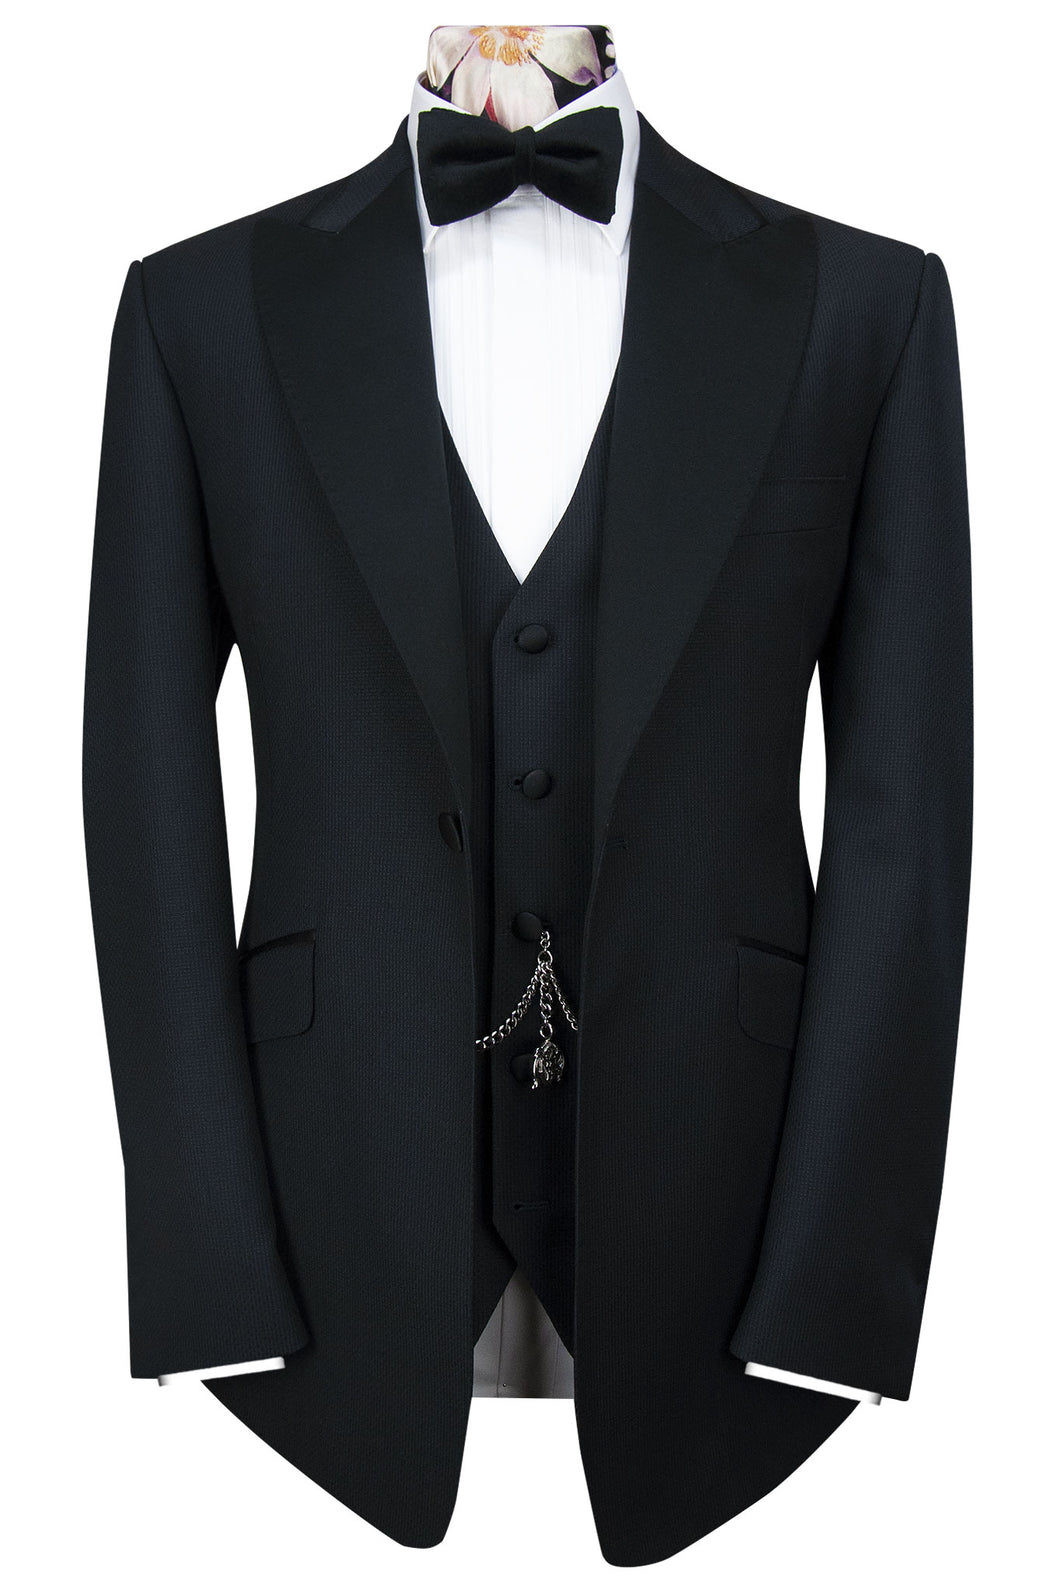 The Cressida Classic Black Dinner Suit with Plain Weave